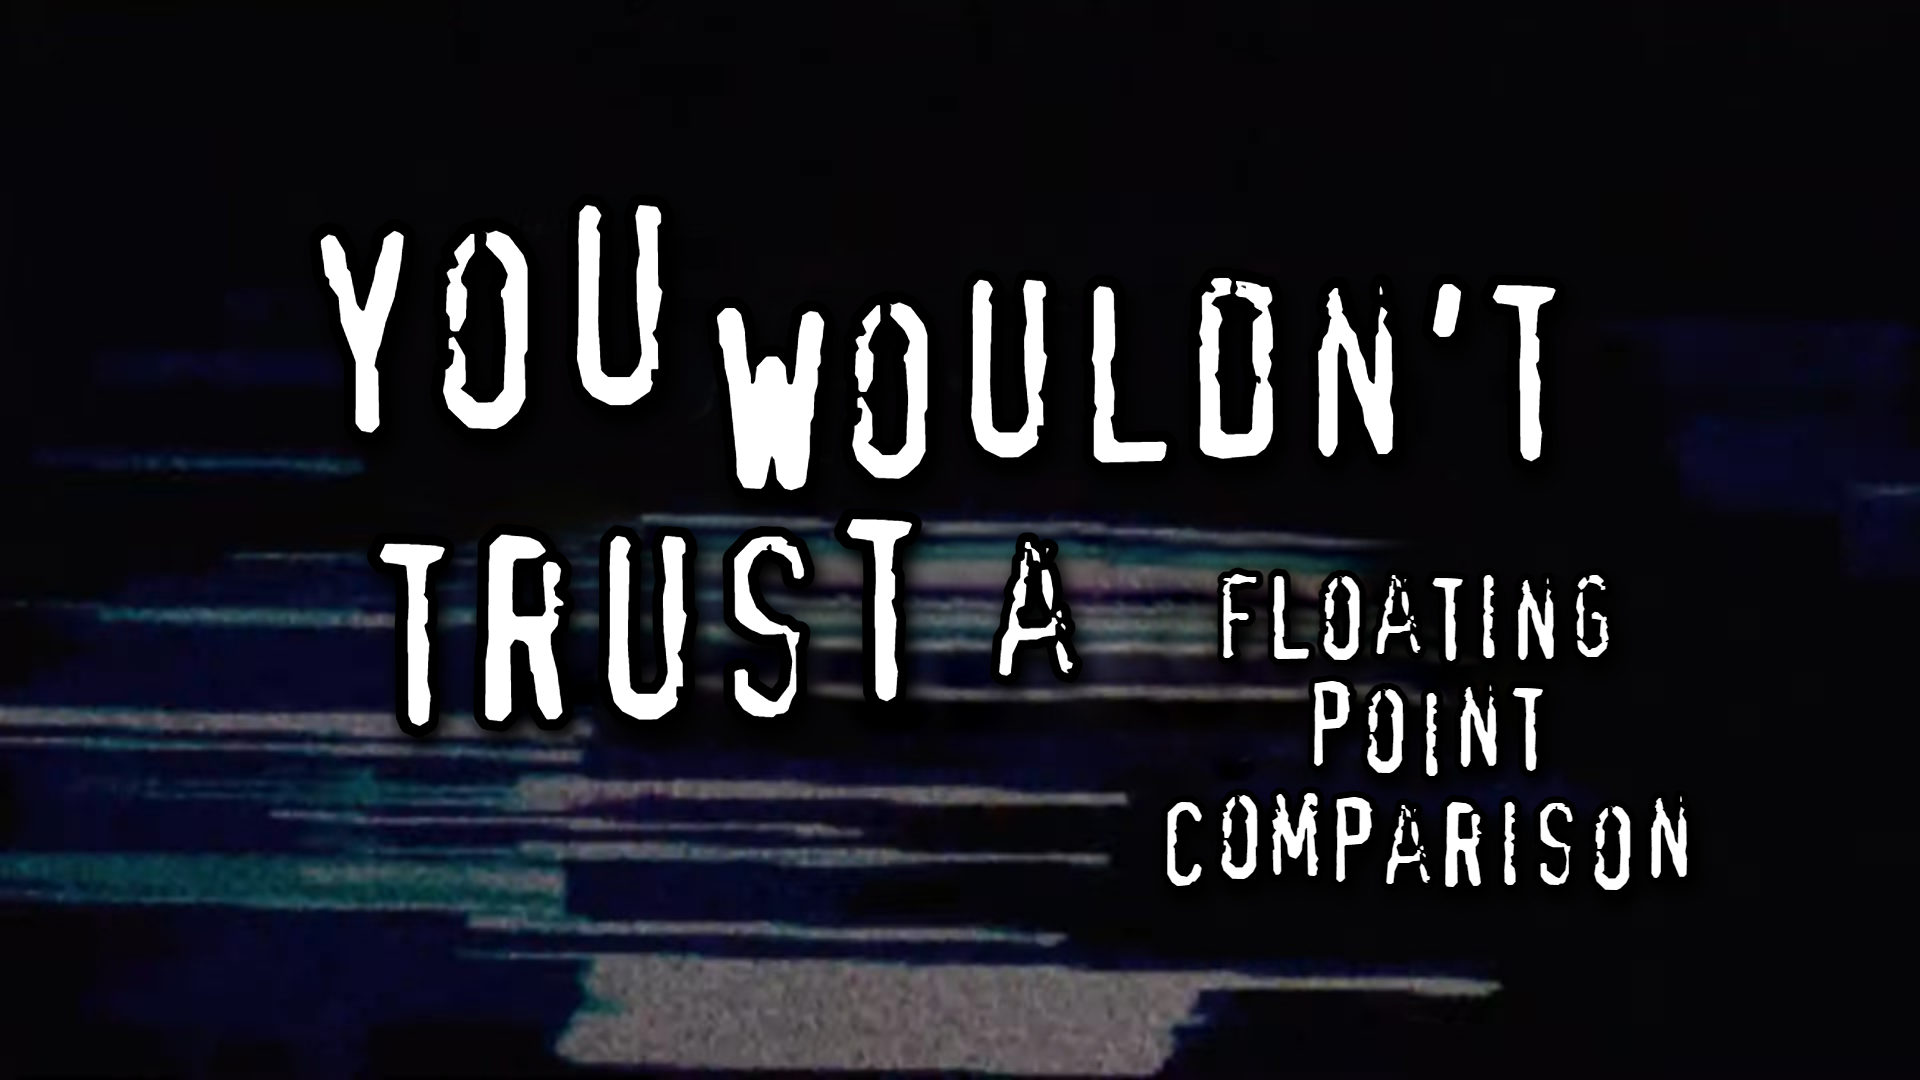 You wouldn't trust a floating point comparison